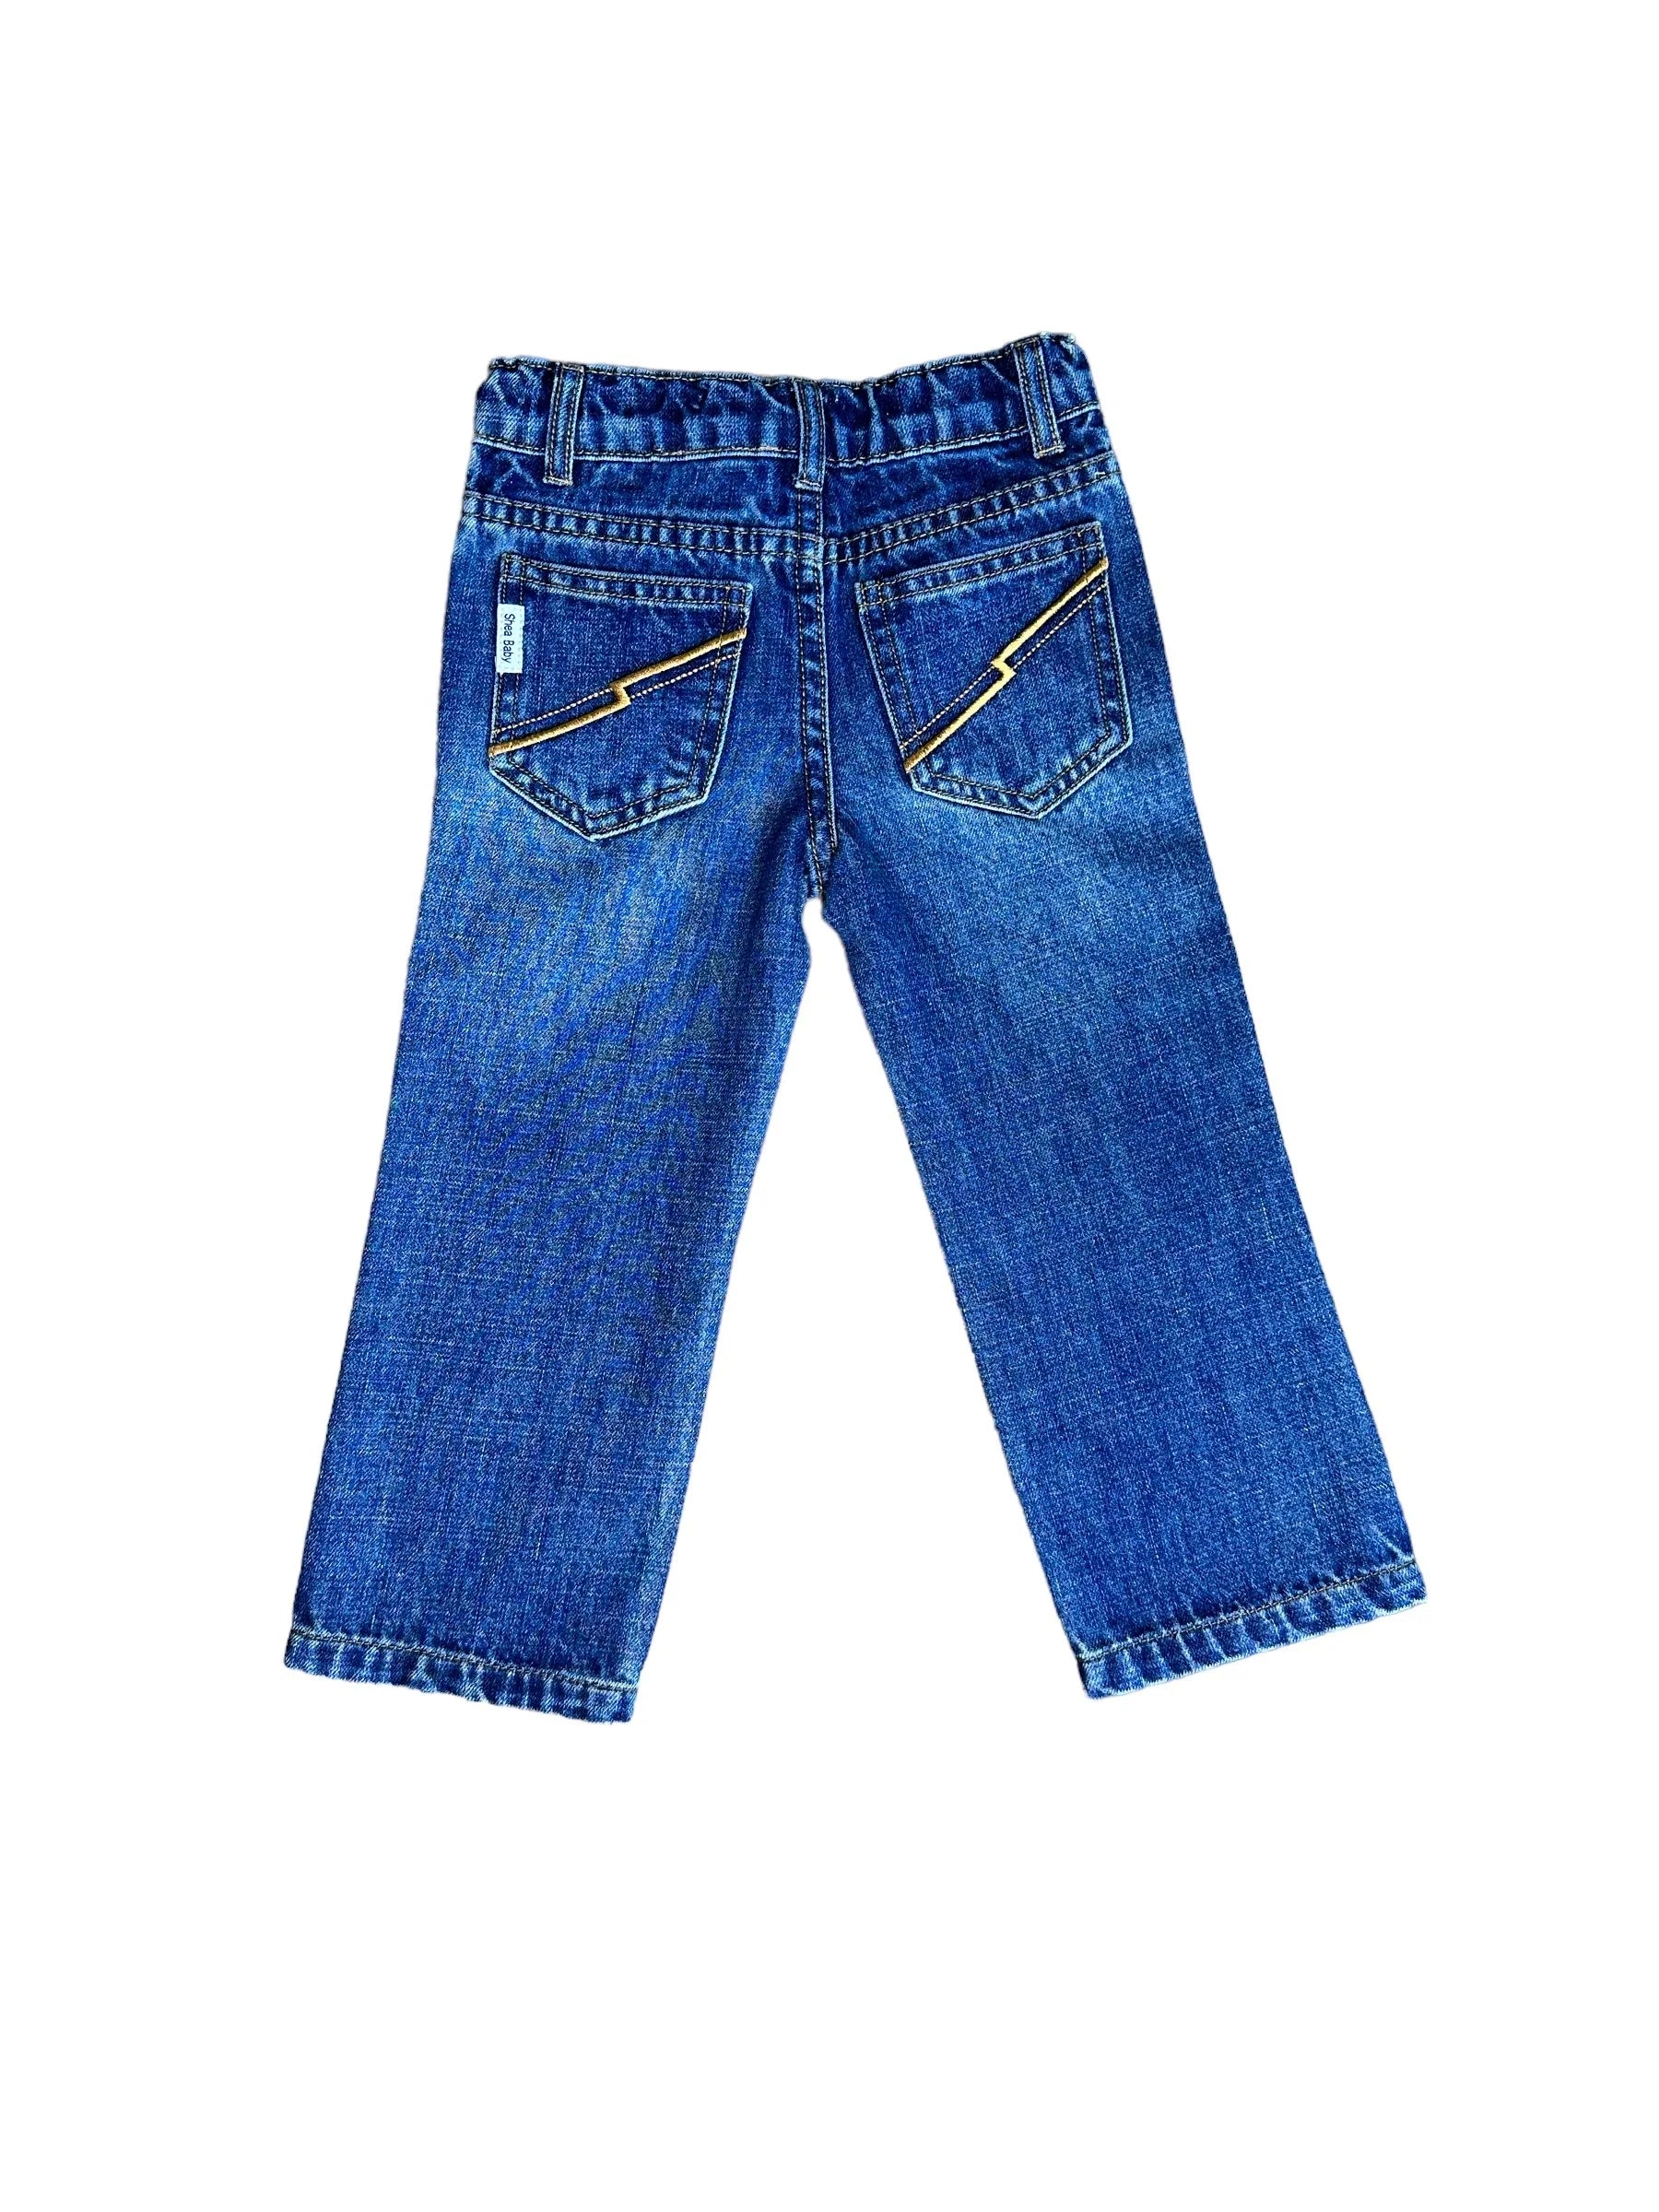 Boys Denim Relaxed Fit Jeans